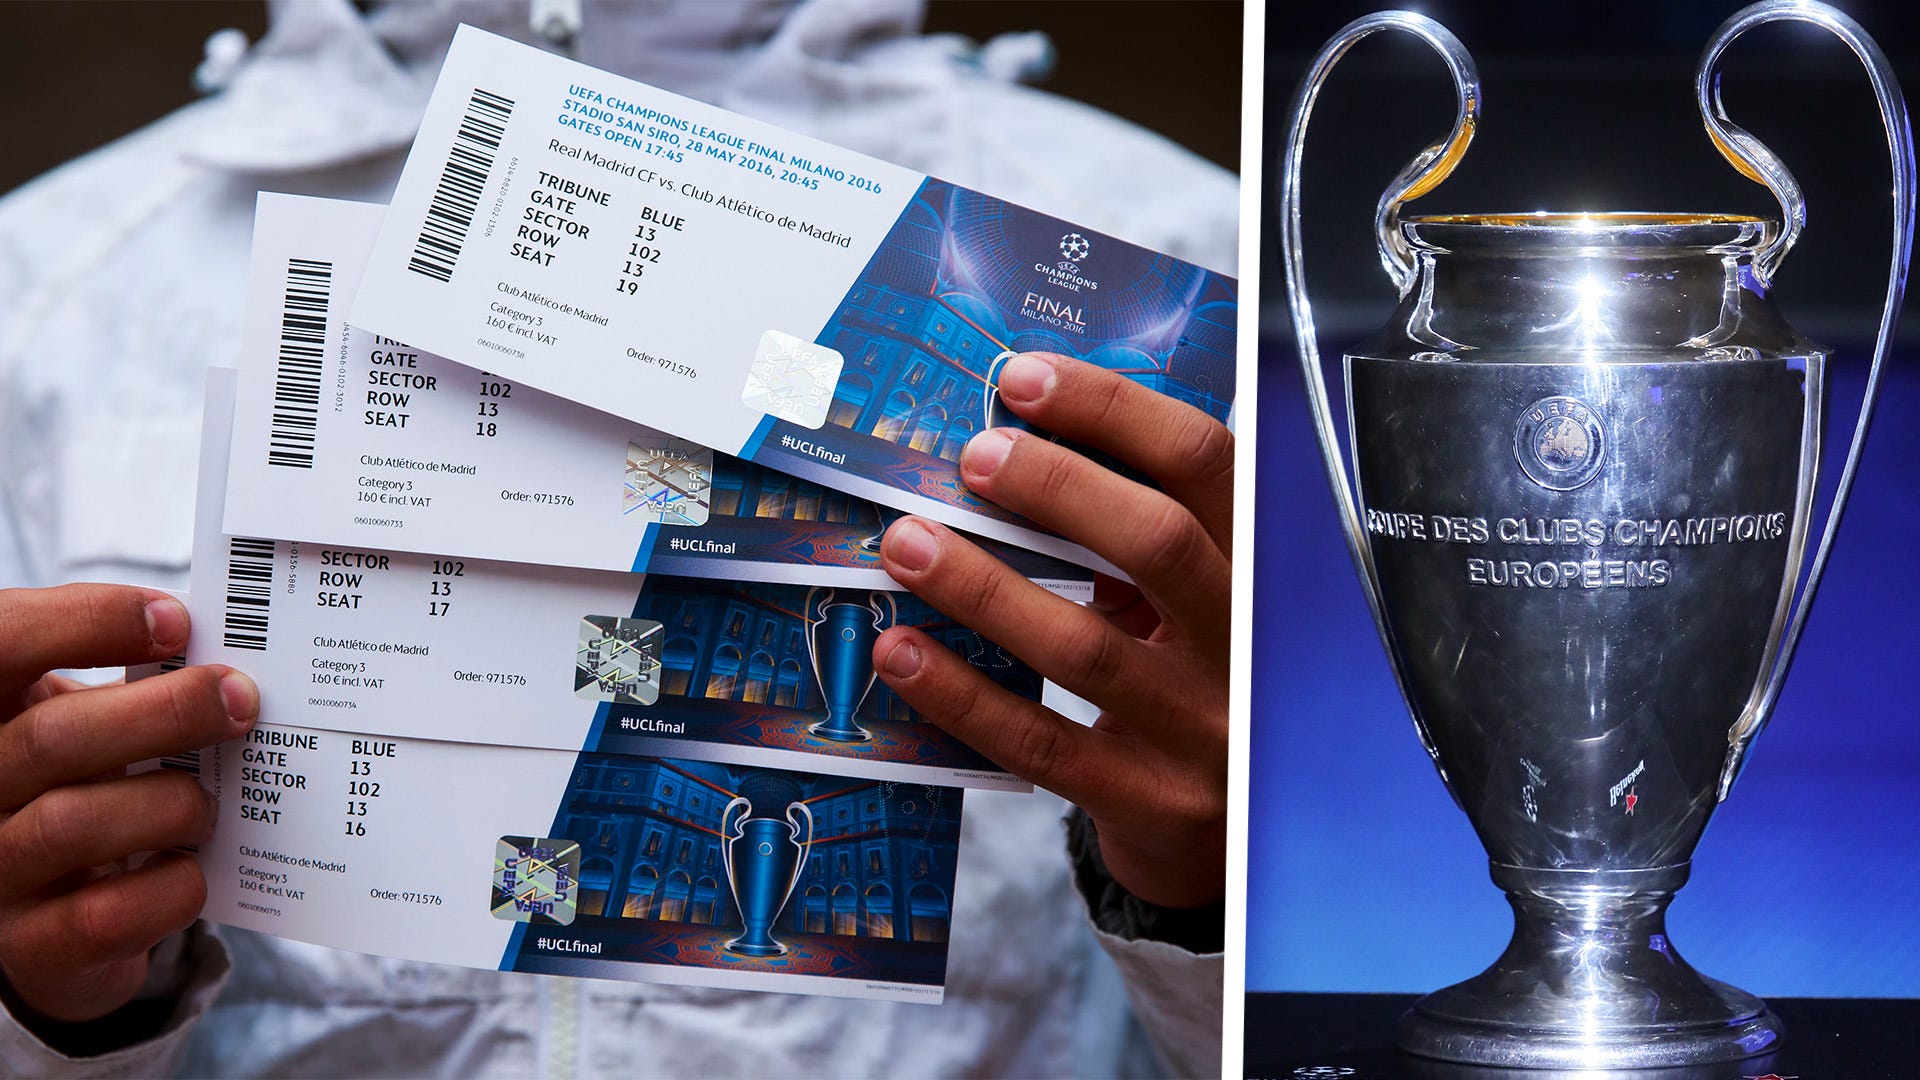 Champions League final tickets How to buy, prices, allocation & Madrid